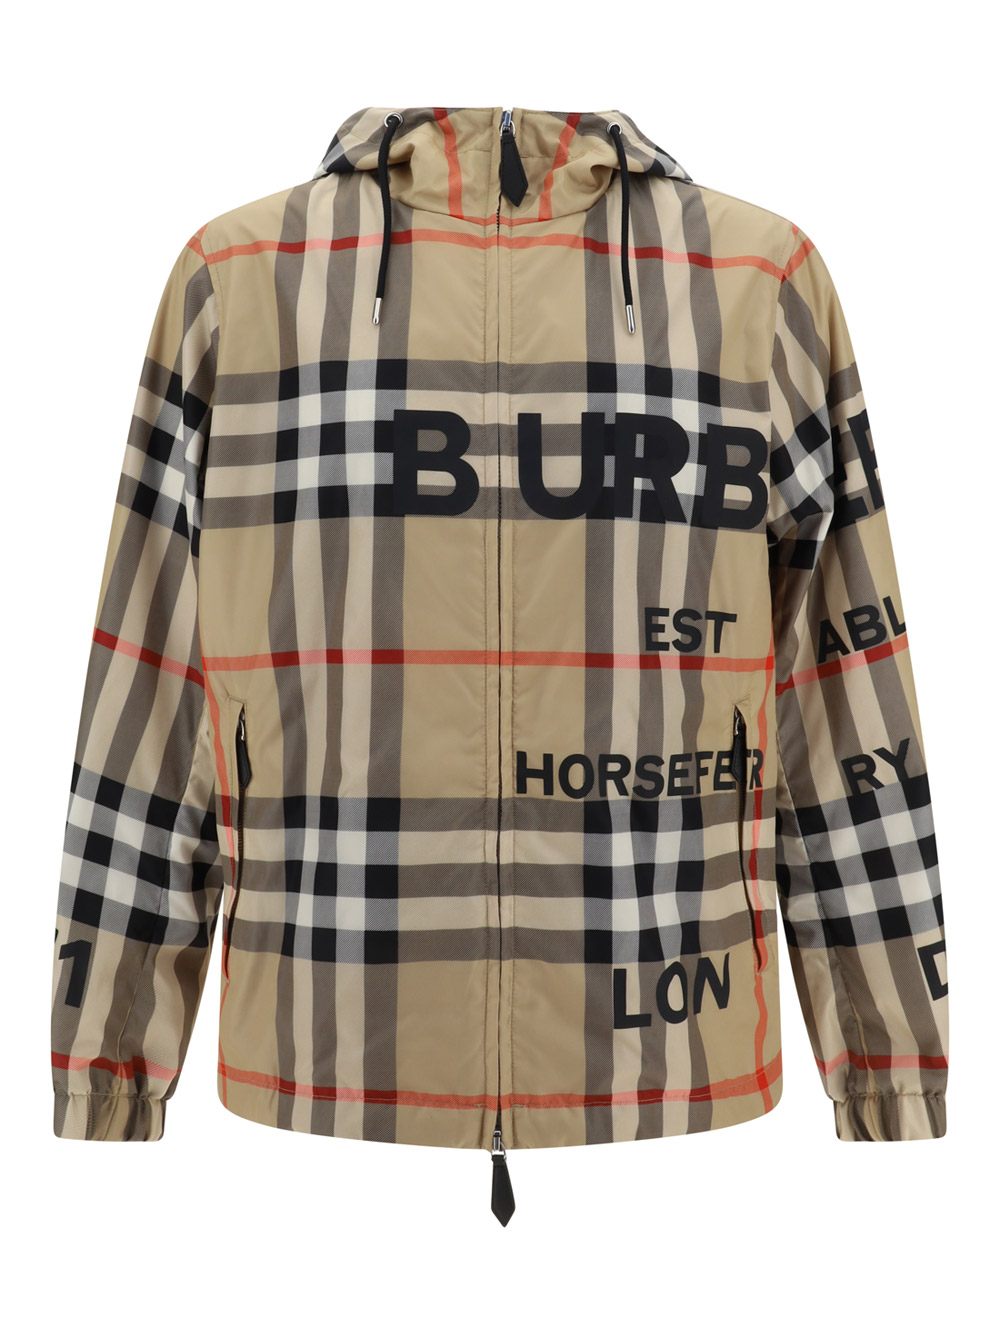 Men's BURBERRY Jackets Sale, Up To 70% Off | ModeSens